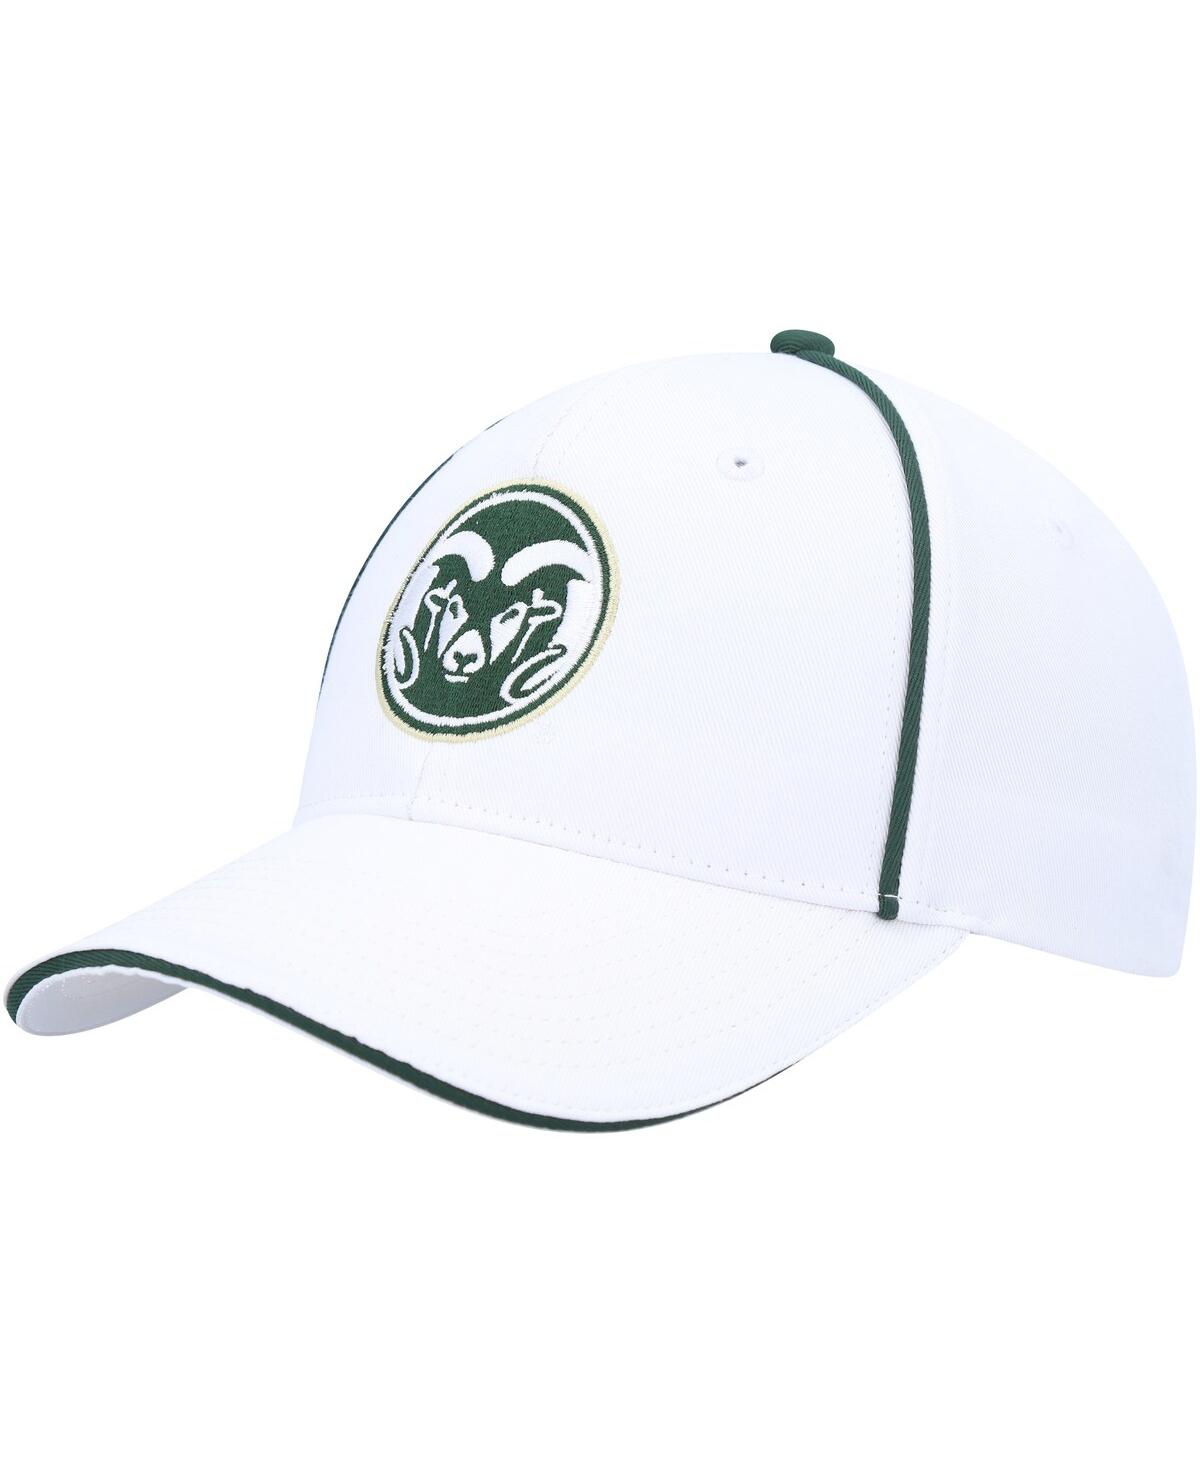 Men's Colosseum White Colorado State Rams Take Your Time Snapback Hat - White